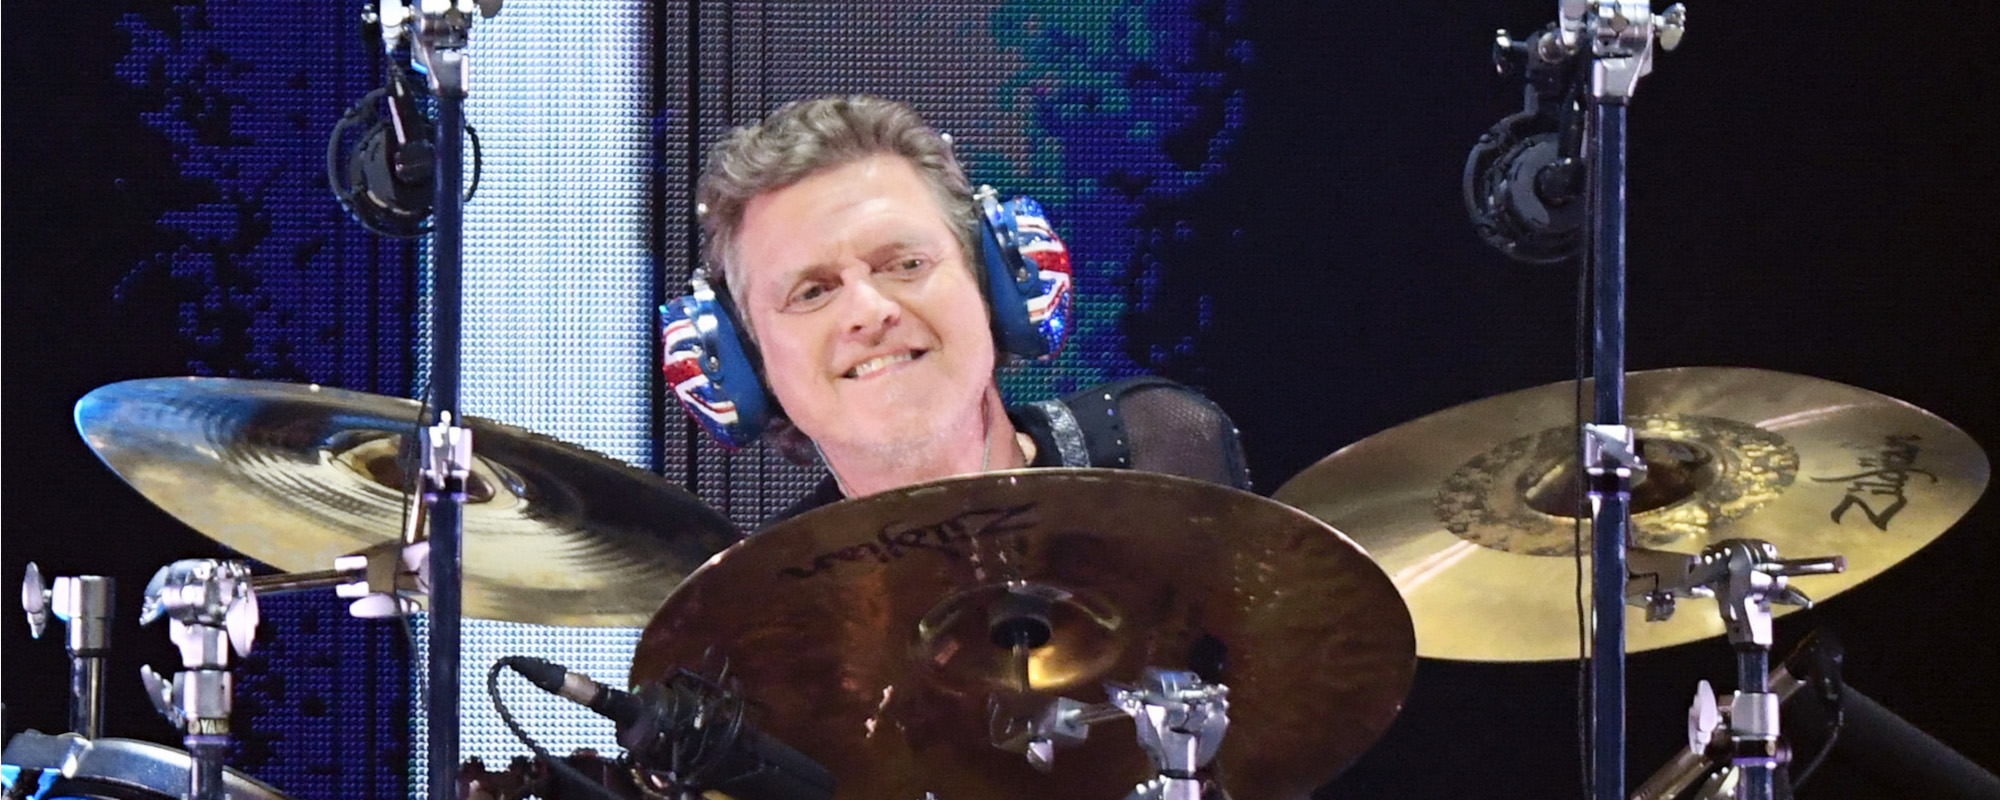 Def Leppard’s Rick Allen Says He’s Focused on “Healing” After Violent Attack